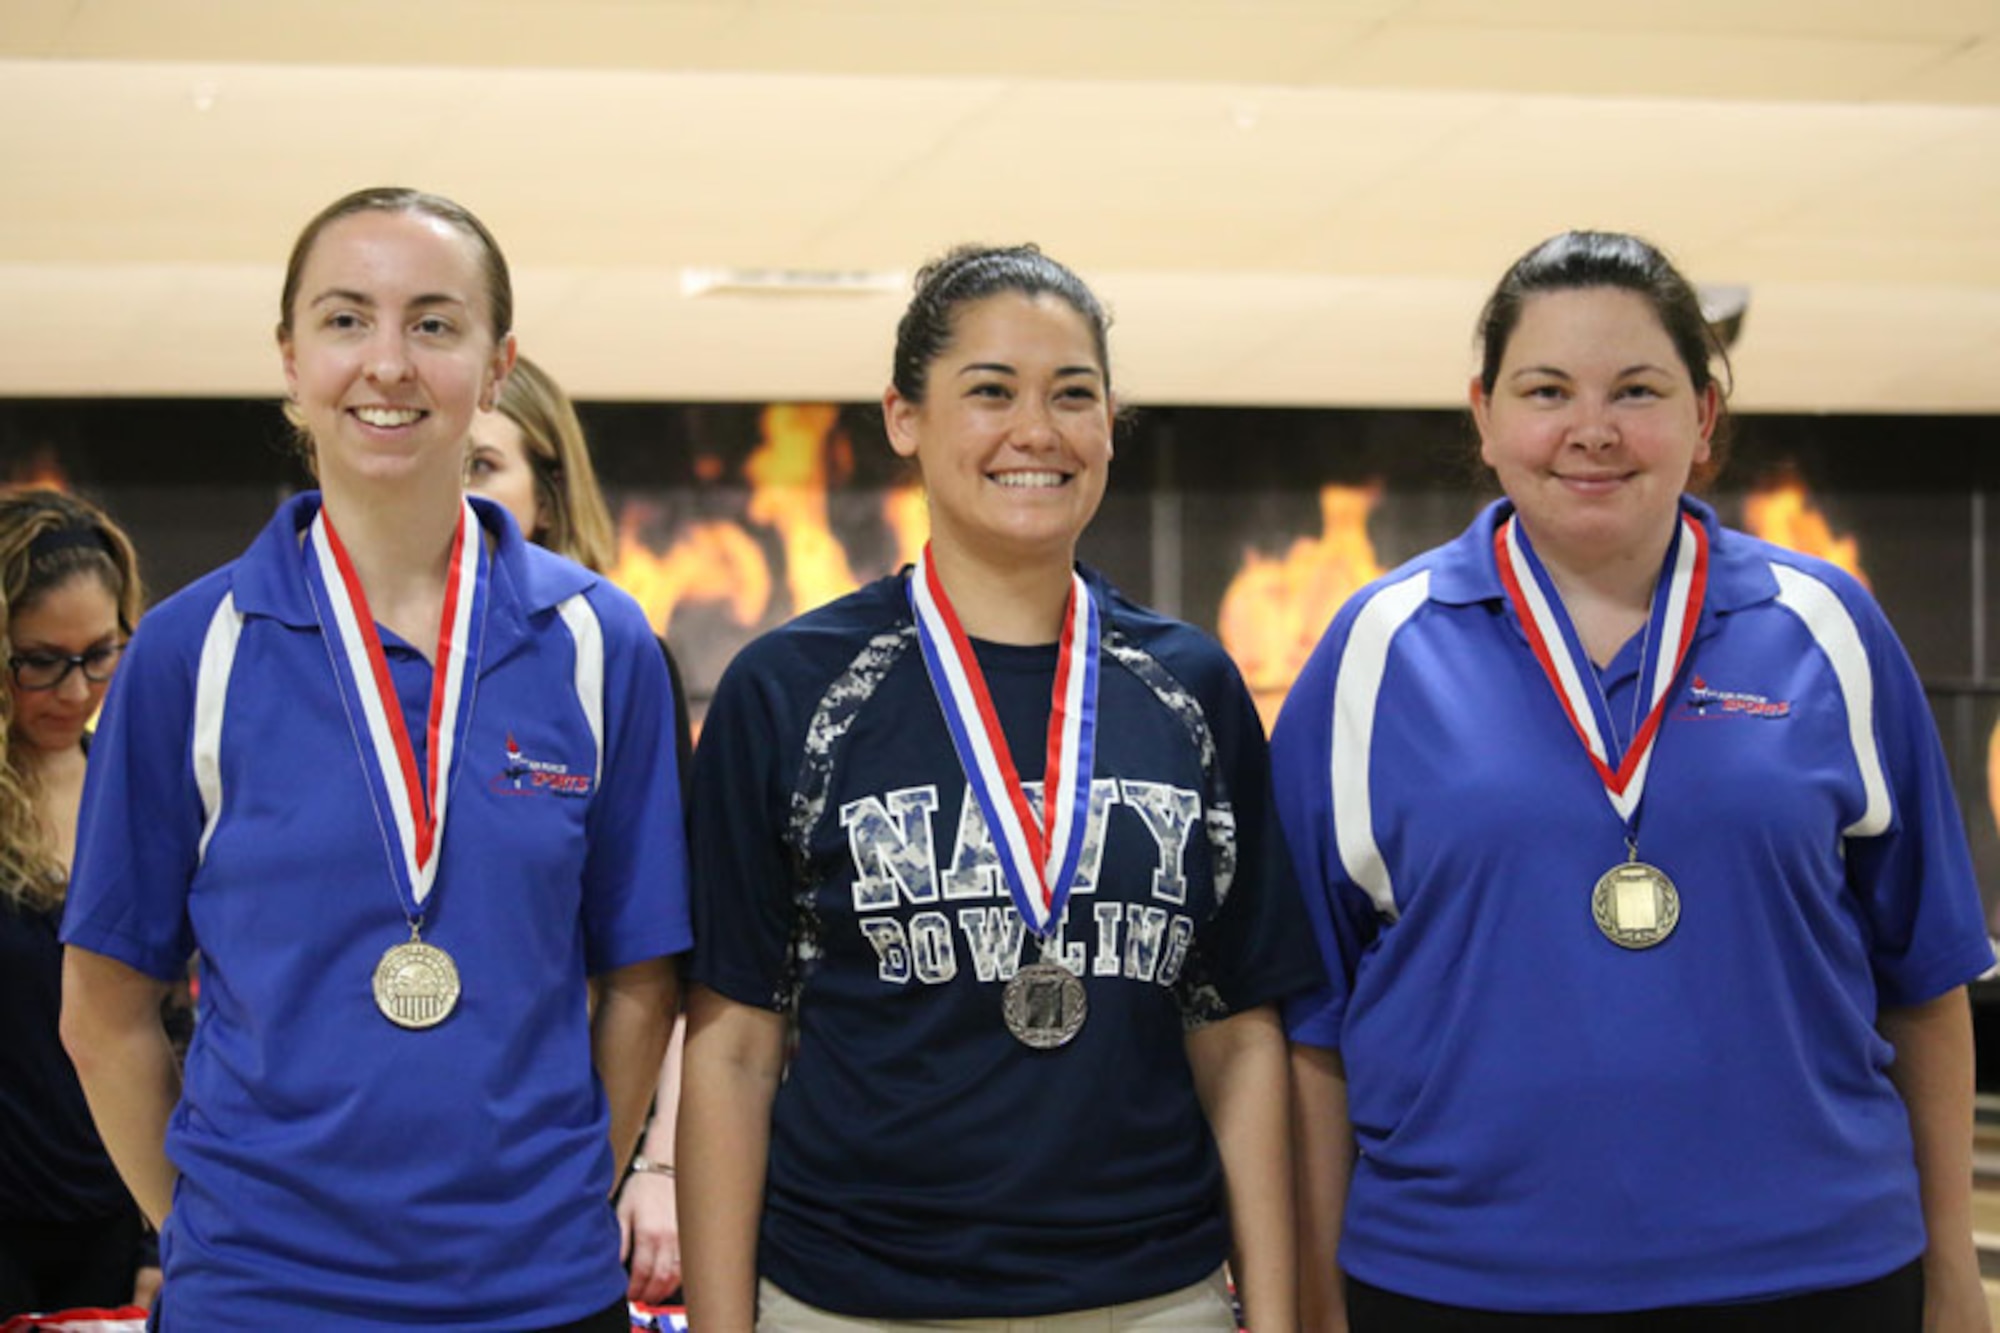 From left to right: Gold medalist Air Force Capt. Danielle Crowder of Little Rock AFB,Arkansas; Silver medalist Navy Petty Officer 1st Class Melanie Griffith of the USS Essex; and Air Force Staff Sgt. Natasha Sanchez of Travis AFB, California on the podium at the 2017 Armed Forces Bowling Championship hosted at Marine Corps Base Camp Pendleton, California from 5-8 May at the Leatherneck Lanes.